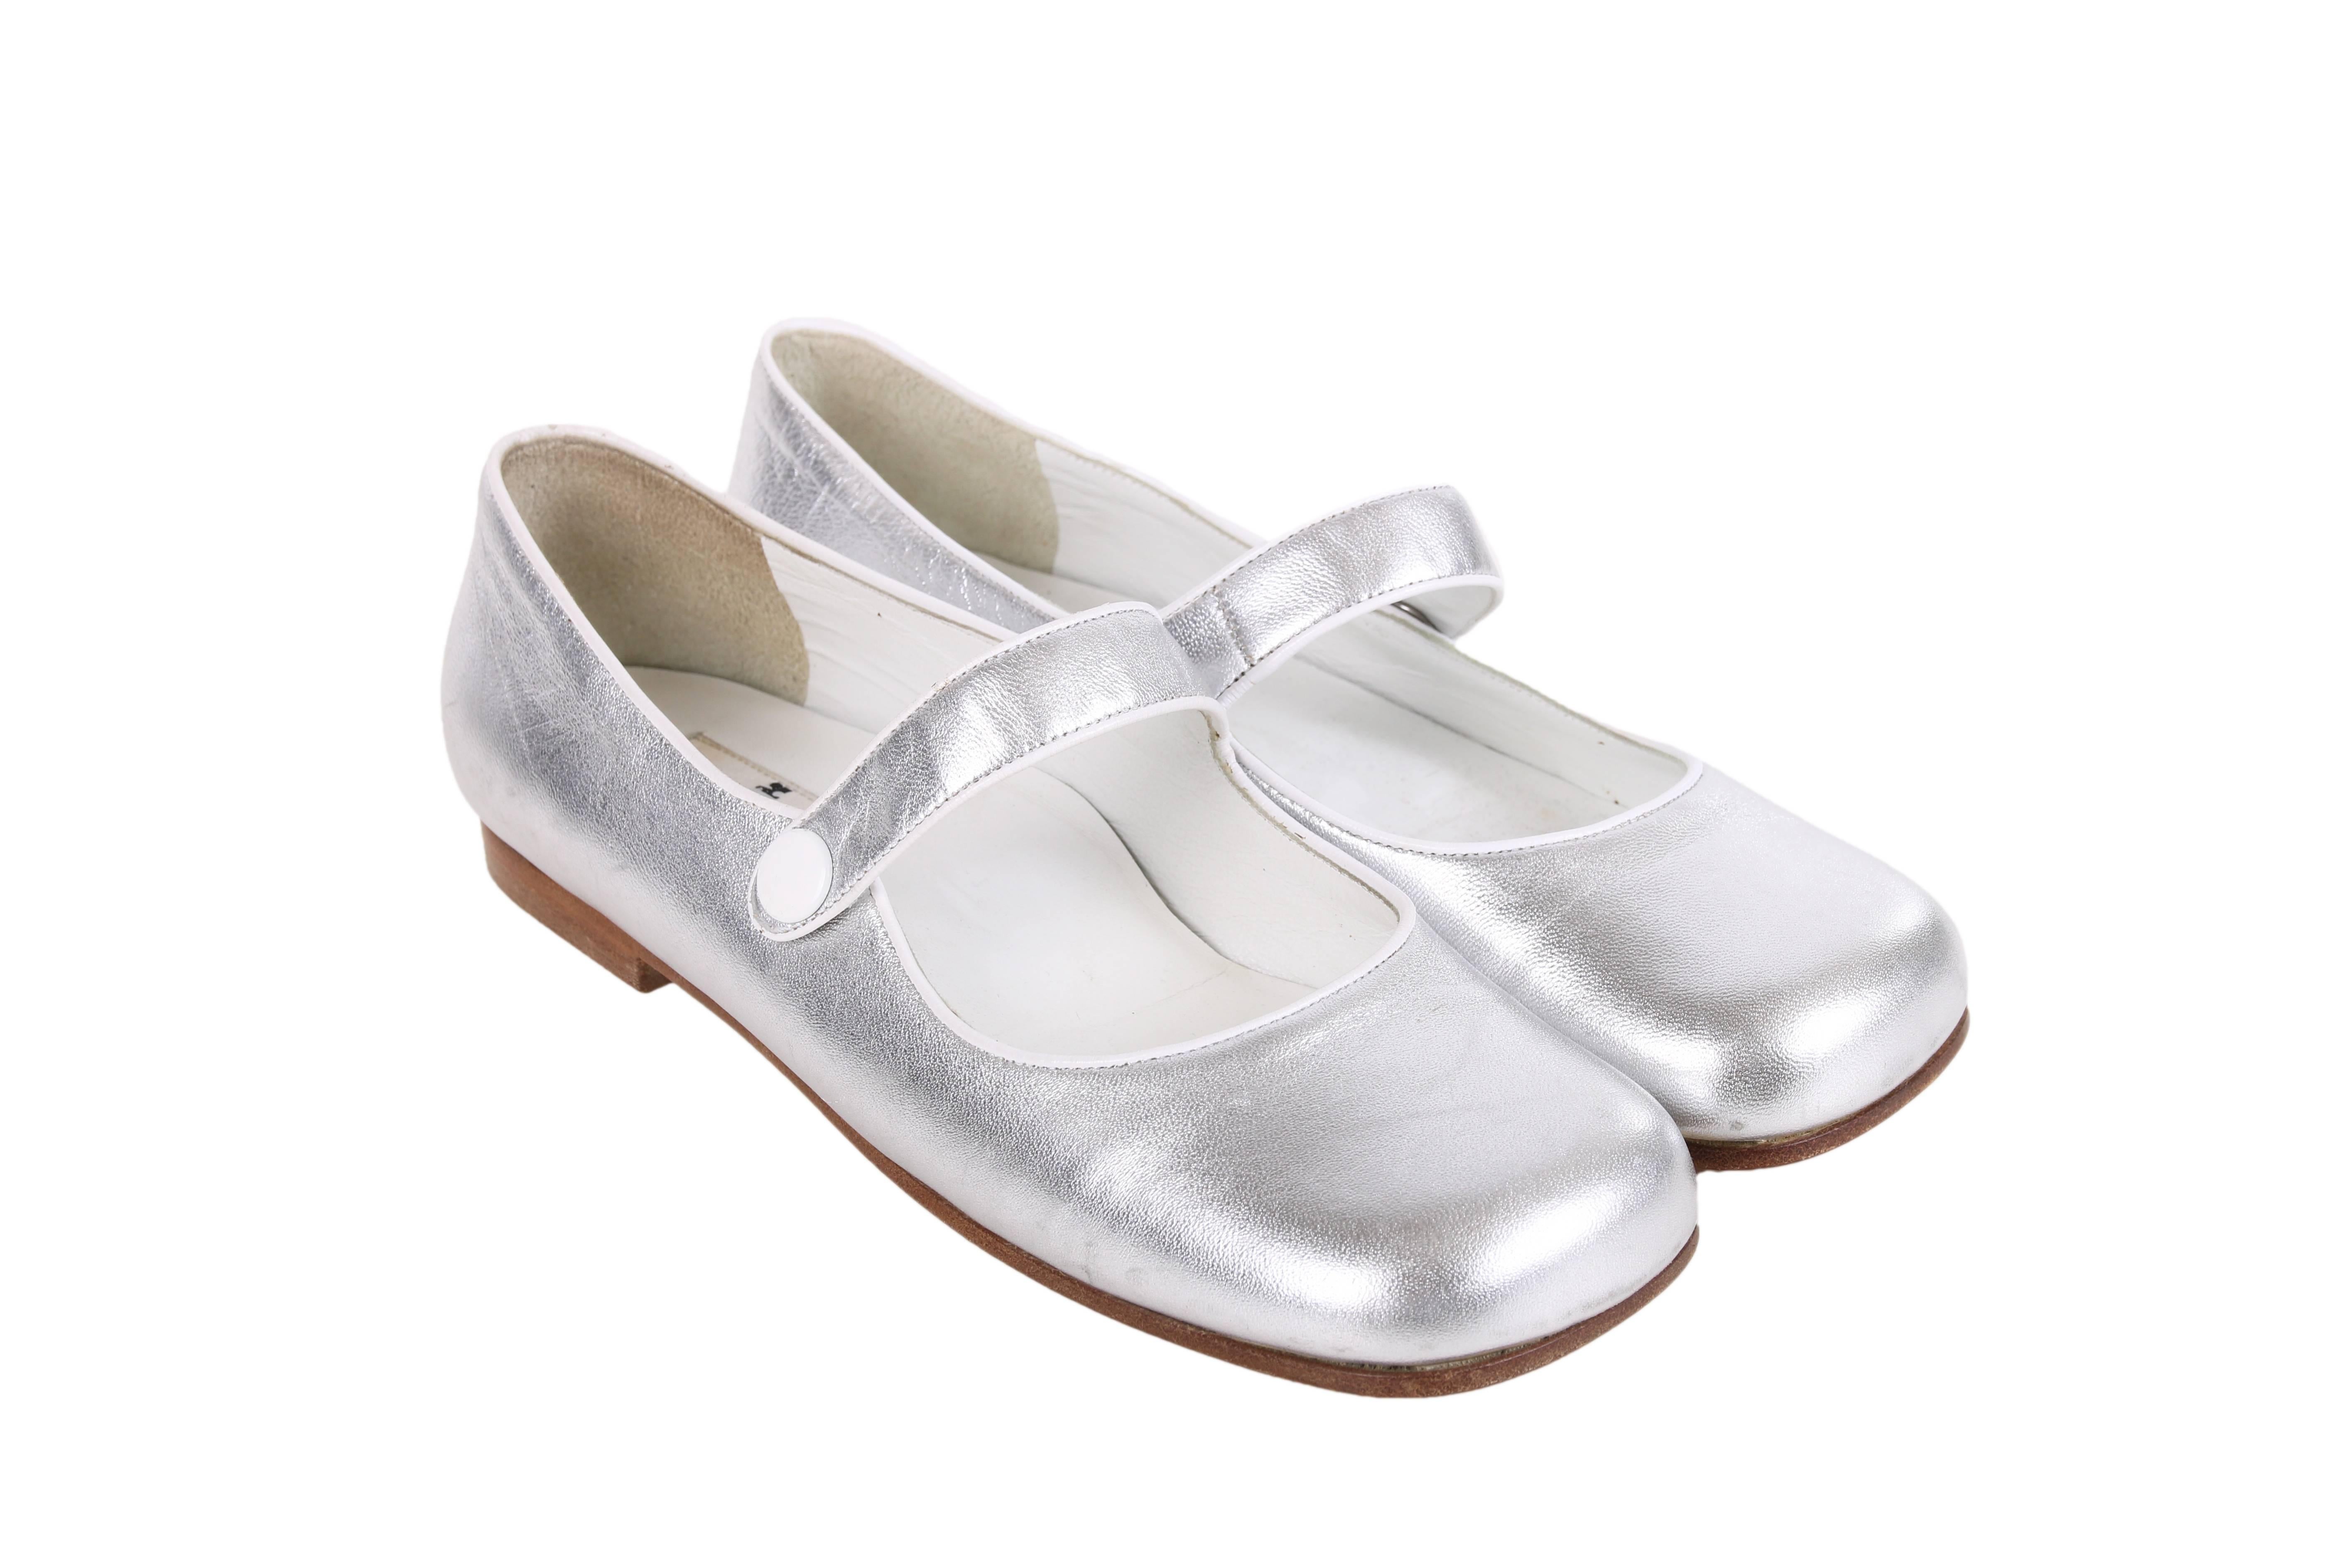 Circa 2010 Courreges silver leather Mary Janes with a square toe, white piping trim and a round white metallic snap closure at the side strap. In excellent condition -  appear to have never been worn. Size 37.